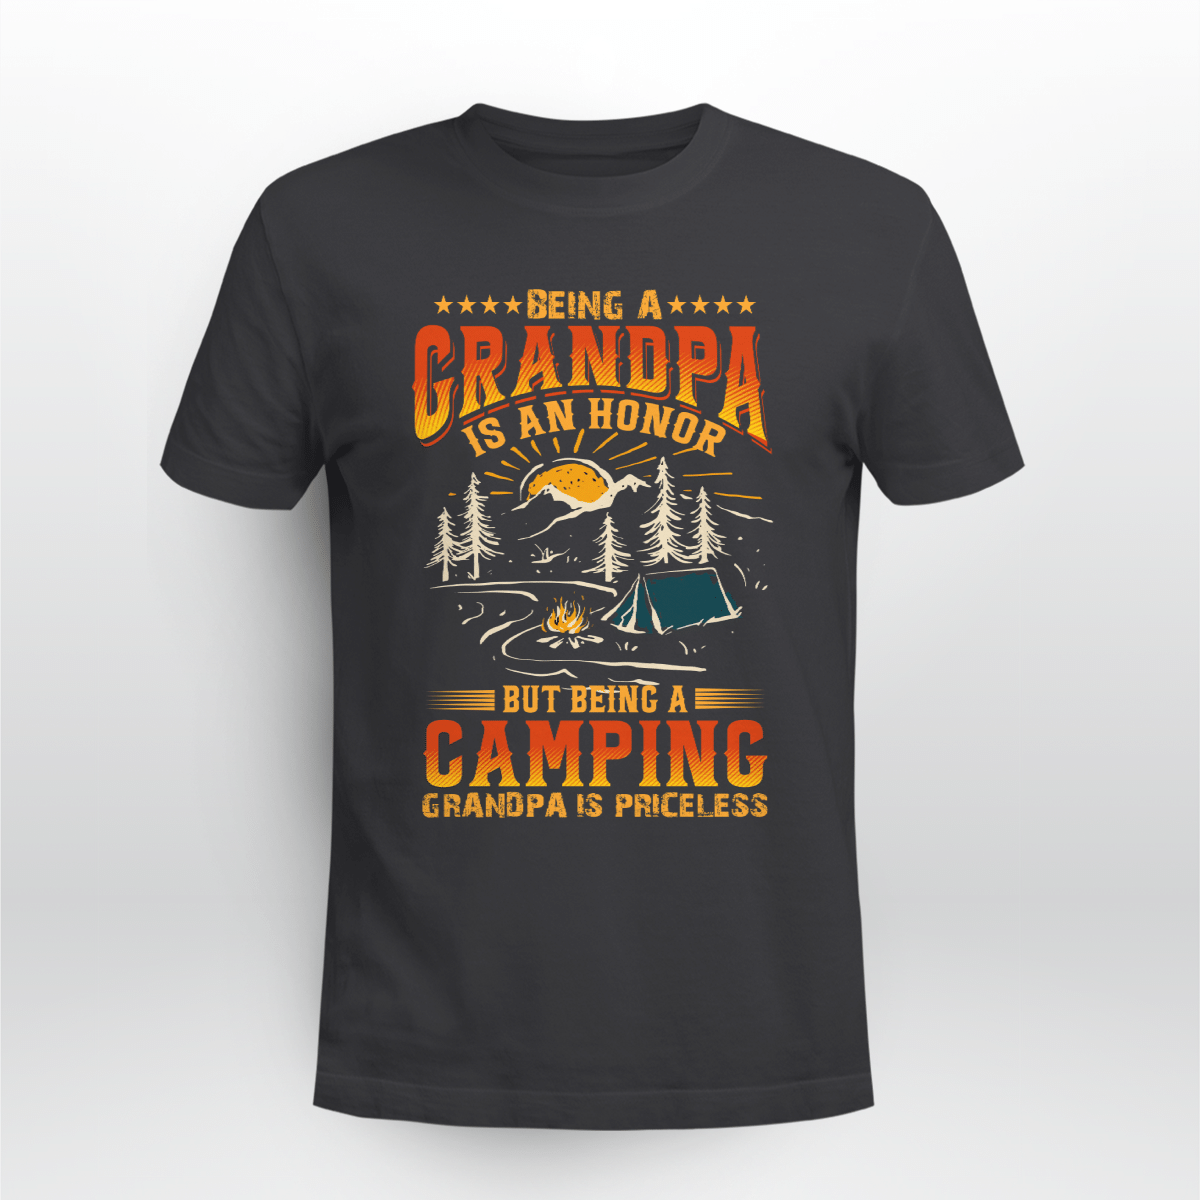 Being A Grandpa Is An Honor But Being A Camping Grandpa Is Priceless Shirt, Camping T-shirt Gift For Dad